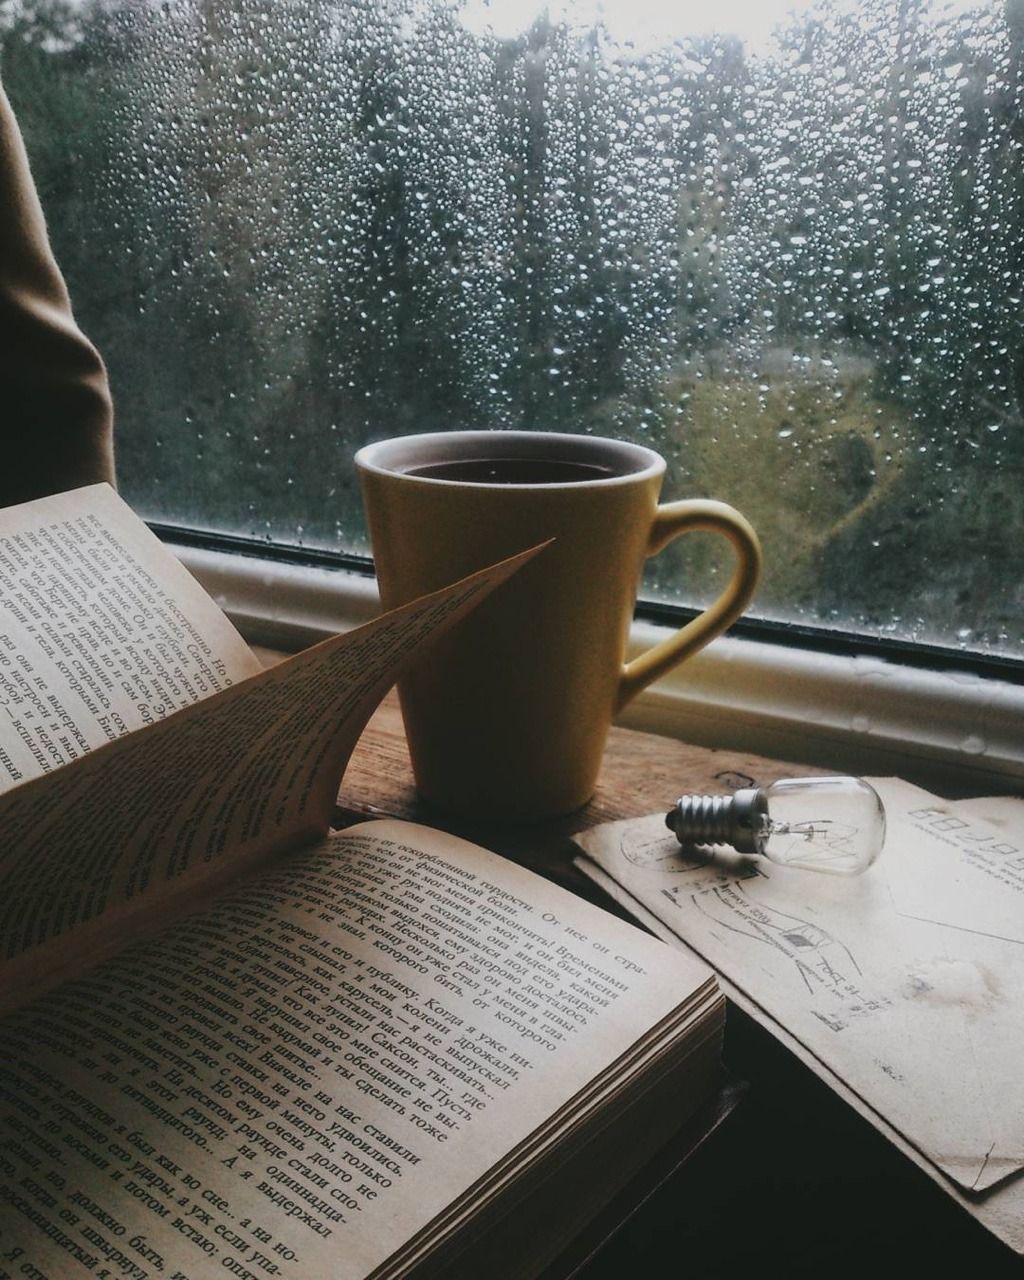 Photography Books And Coffee - HD Wallpaper 